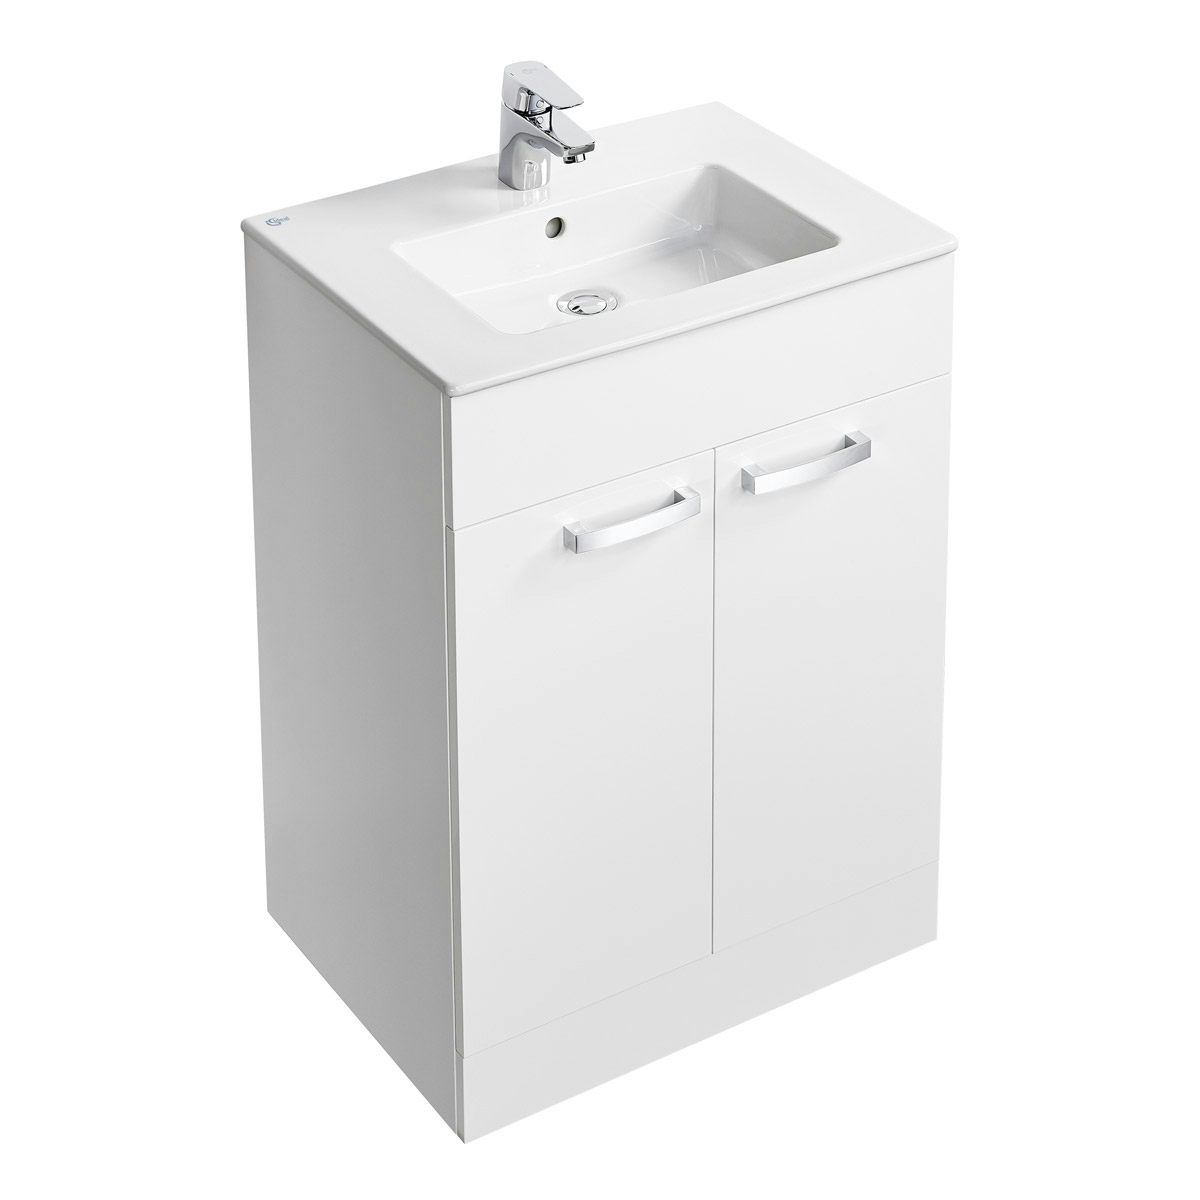 Ideal Standard Tempo gloss white vanity door unit and sink